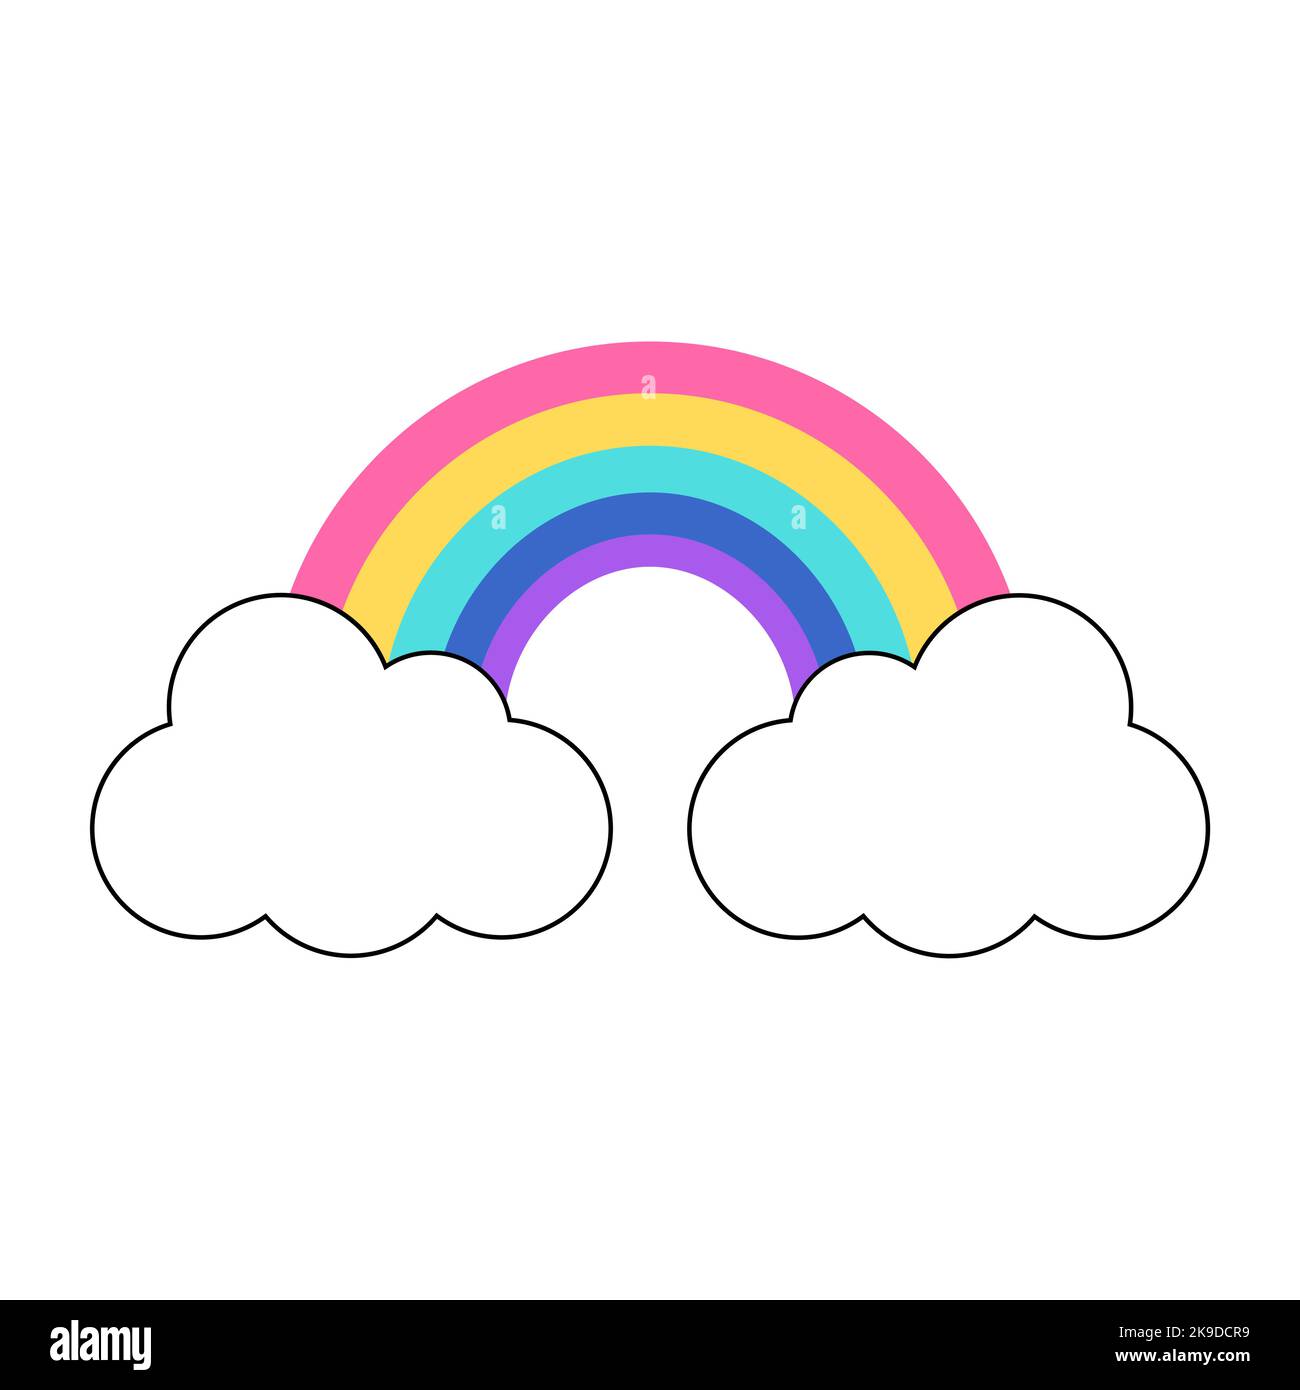 Y2k groovy element. Colorful rainbow with clouds isolated on white background. 2000 vibes collection. 2000s cartoon hand drawn vector illustration. Stock Vector